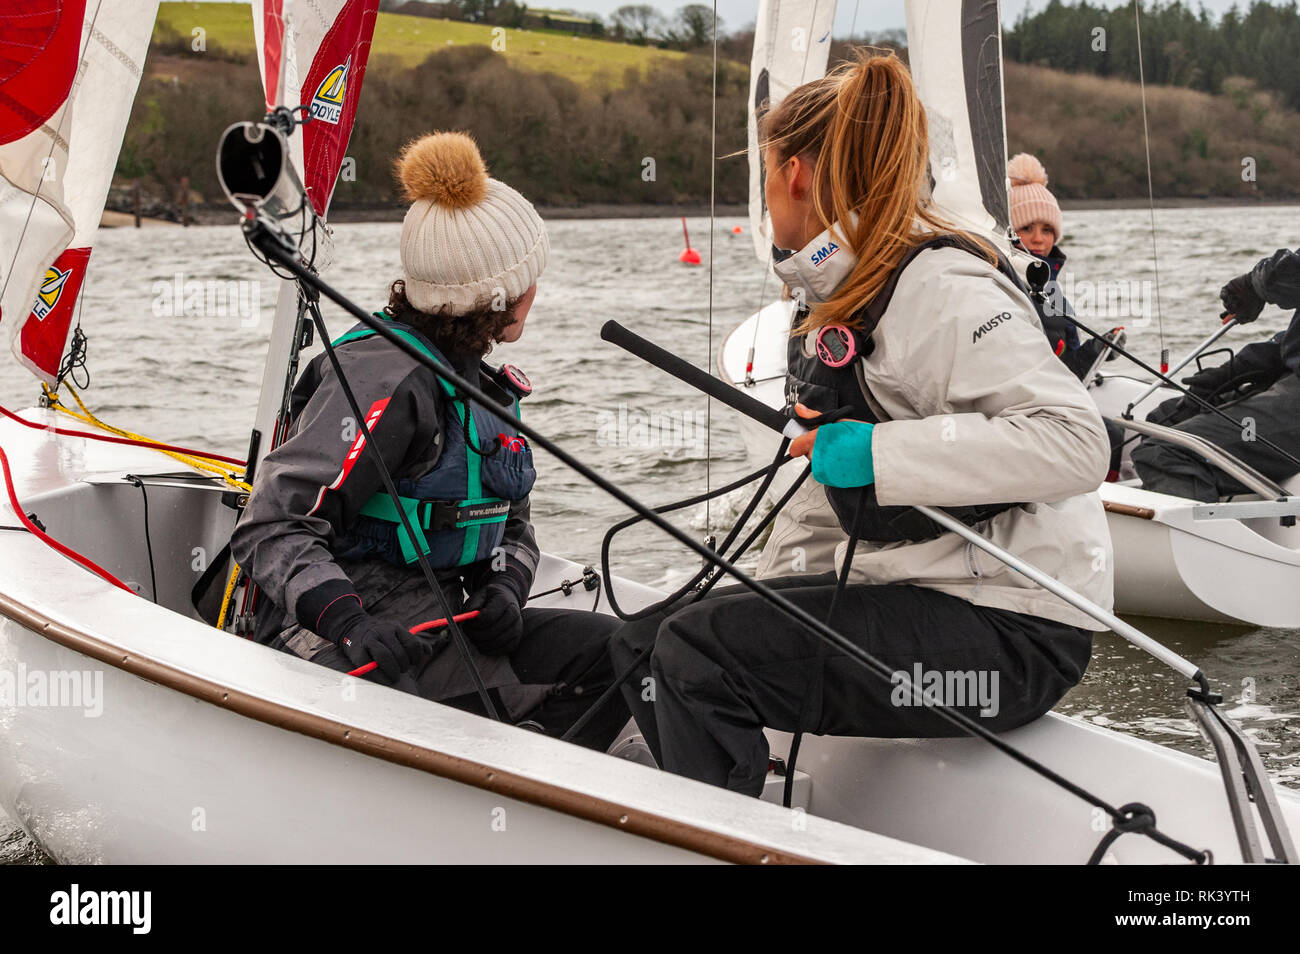 Bantry, West Cork, Ireland. 9th Feb, 2019. Bantry Sailing Club is hosting the Irish Universities Sailing Regatta, organised by UCC, this weekend when approx. 150 sailors from 8 universities around Ireland gather for racing and social events. The regatta consists of 80 races over the two days in 'Firefly' sailing dinghies. Credit: Andy Gibson/Alamy Live News. Stock Photo